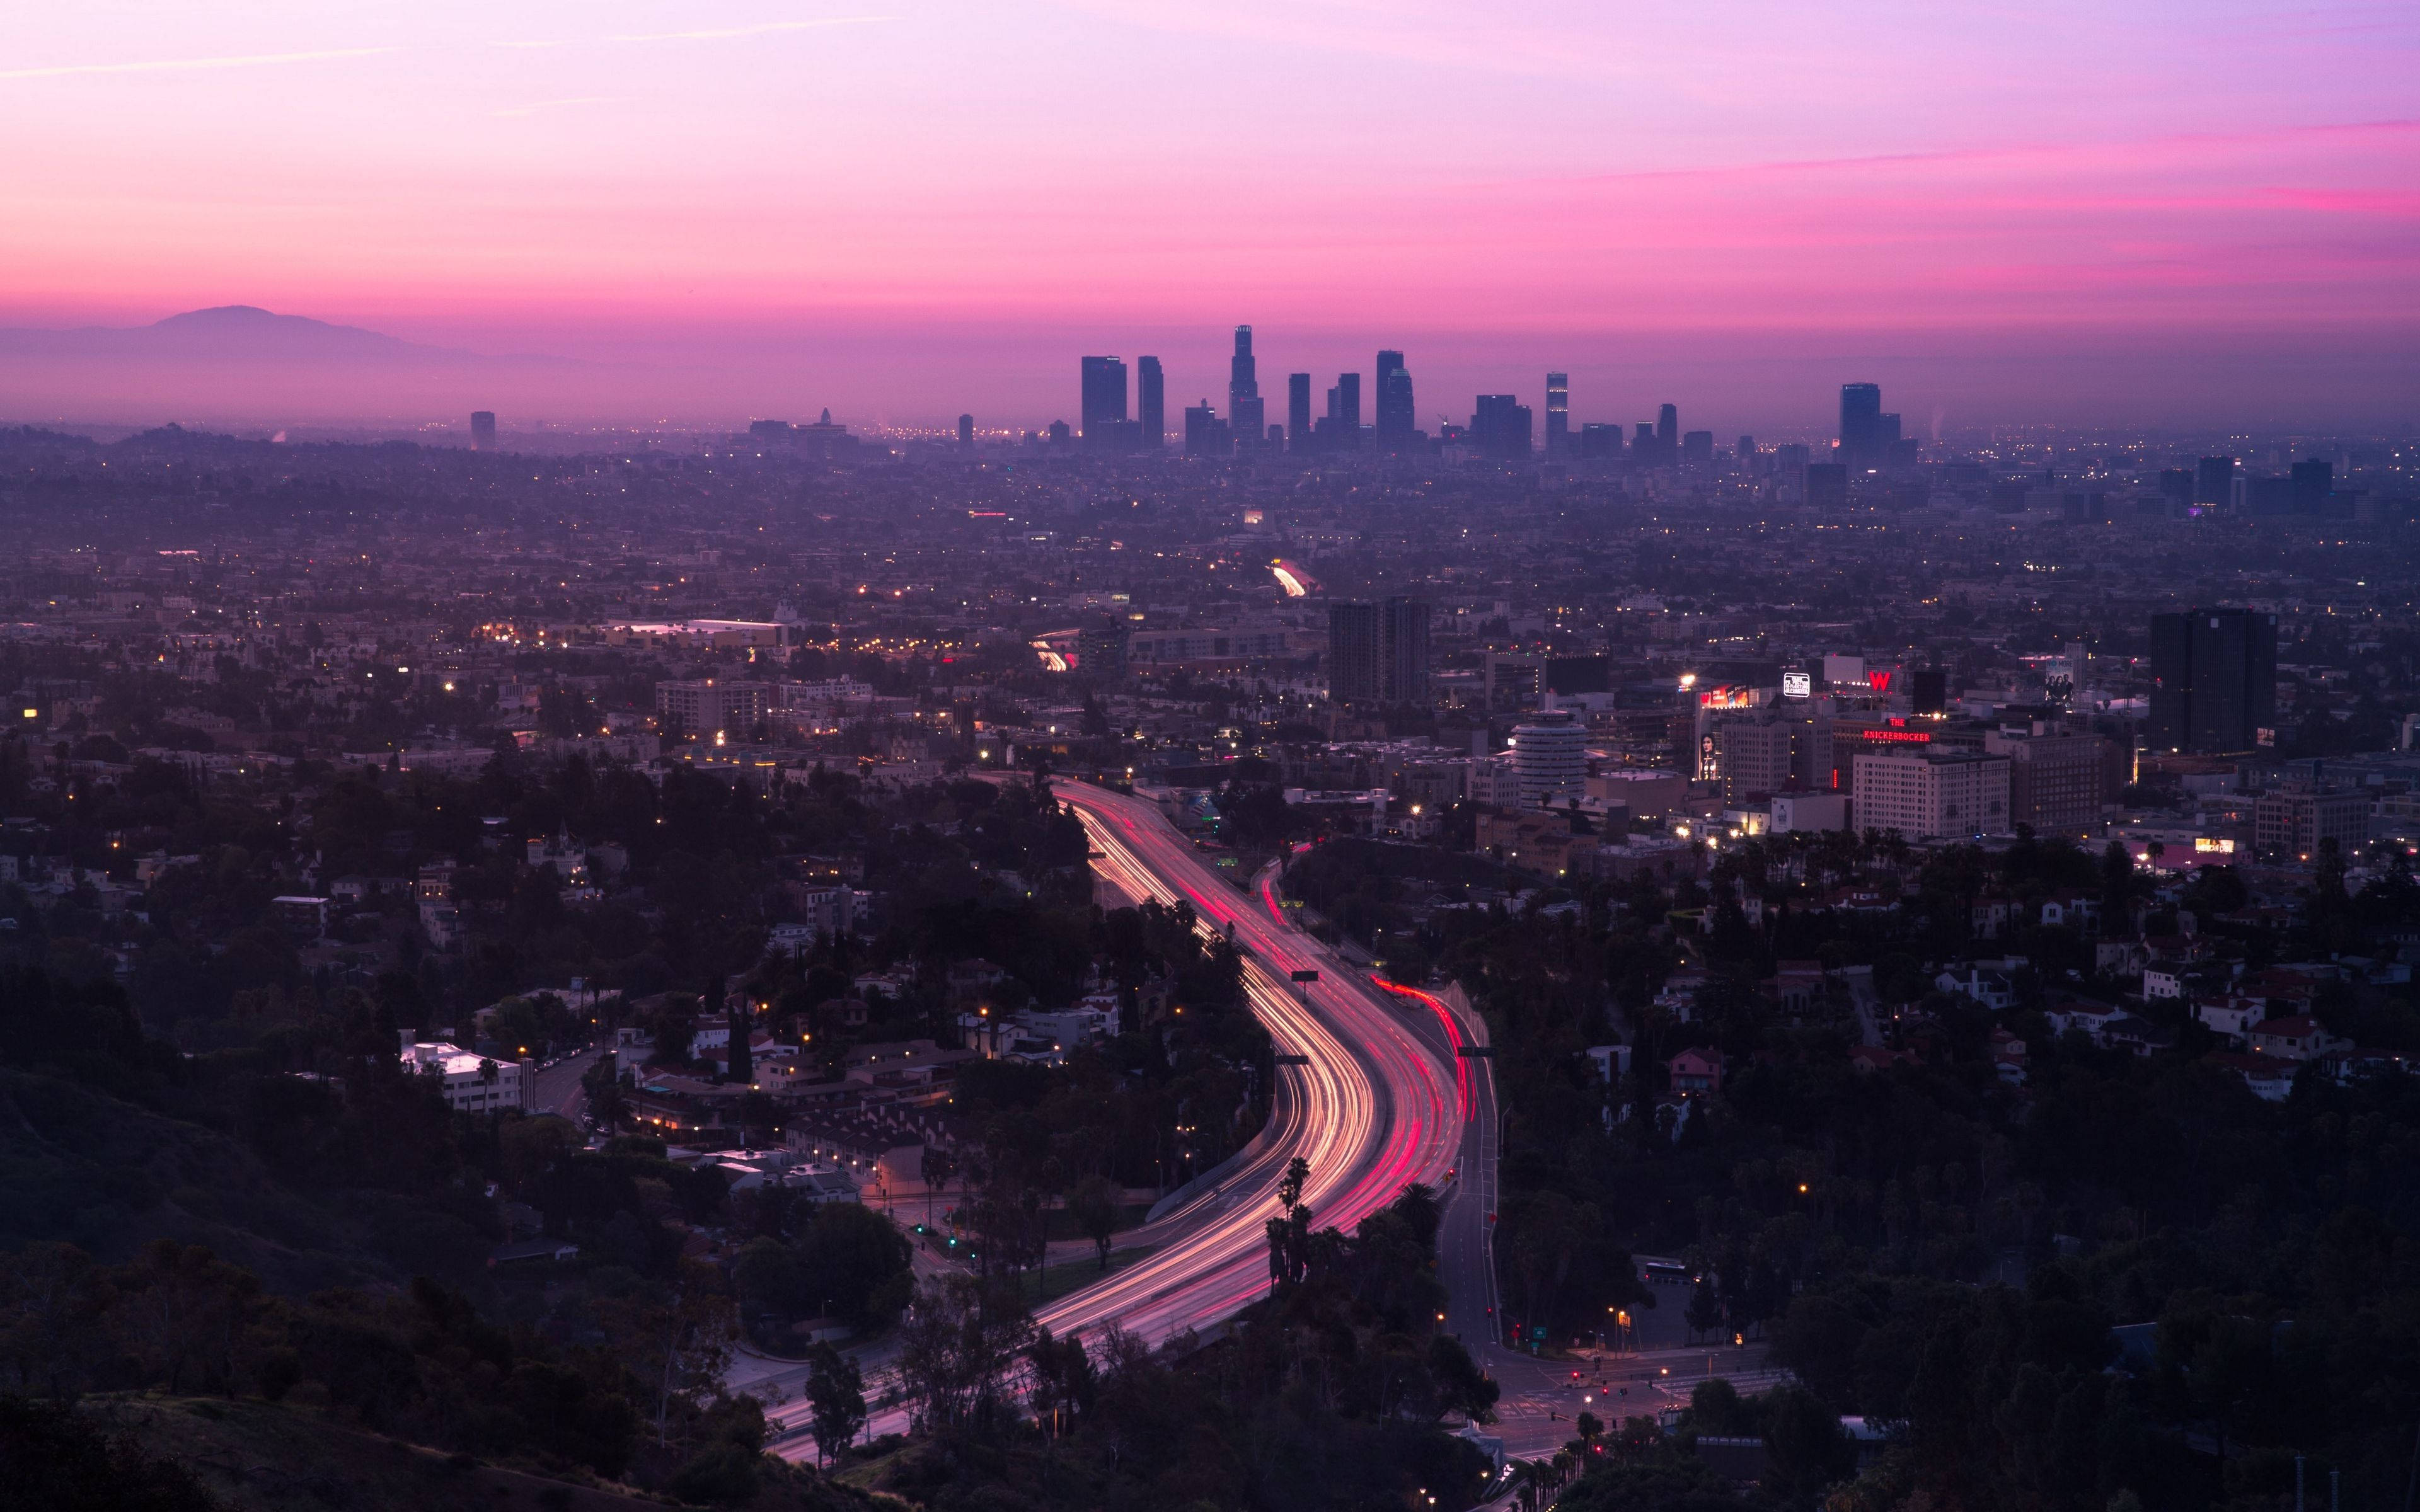 A pink and purple sunset over the city of Los Angeles - Los Angeles